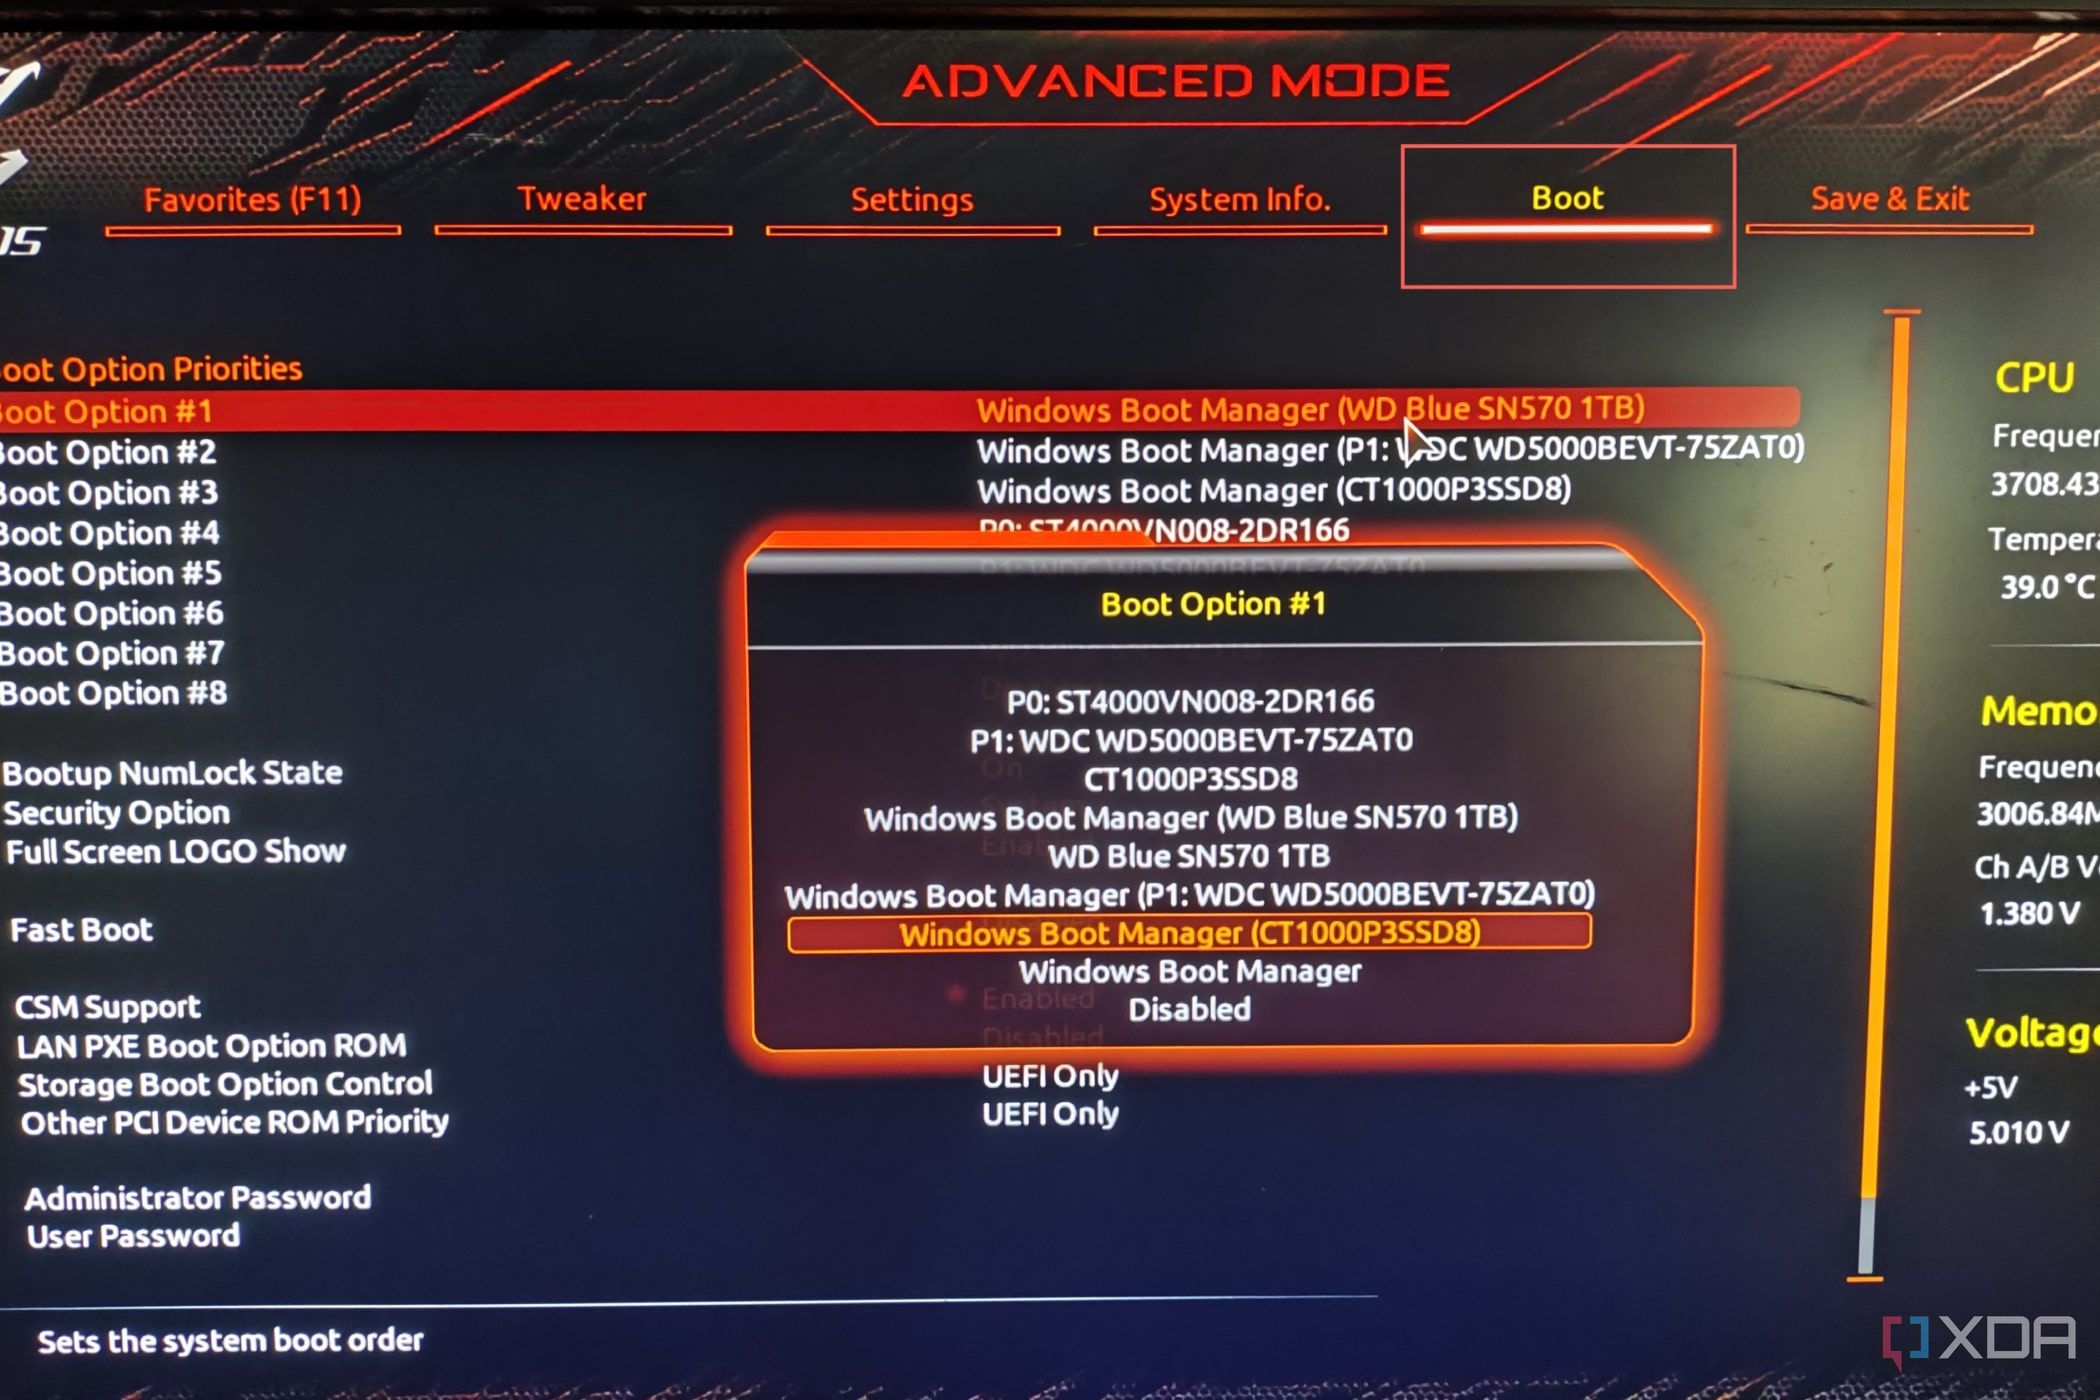 A screenshot of the Boot settings in the BIOS